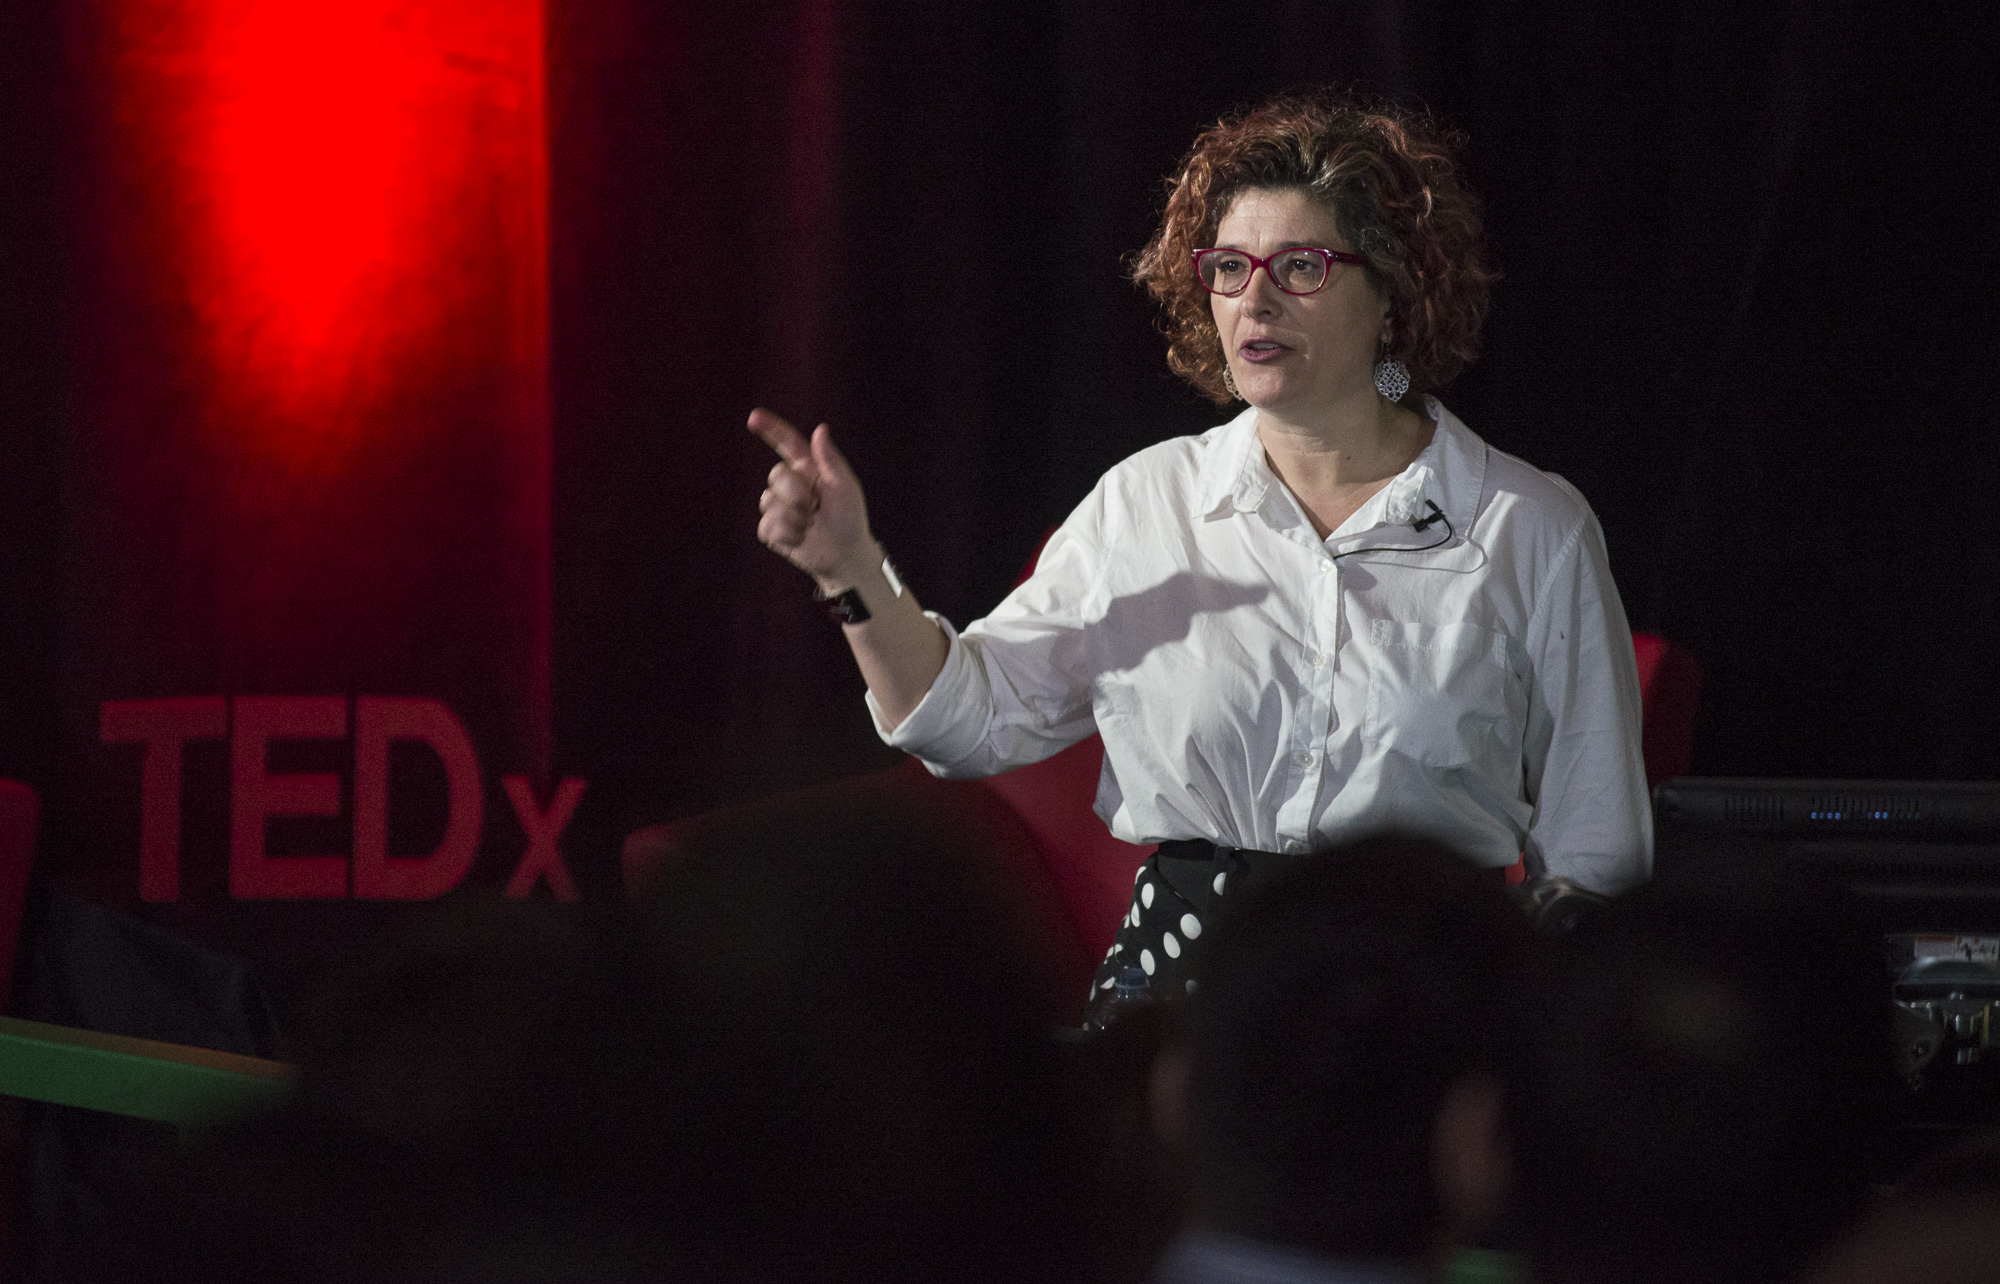 Being audacious in mid-sized cities: Lisa’s TEDX UNB SJ talk